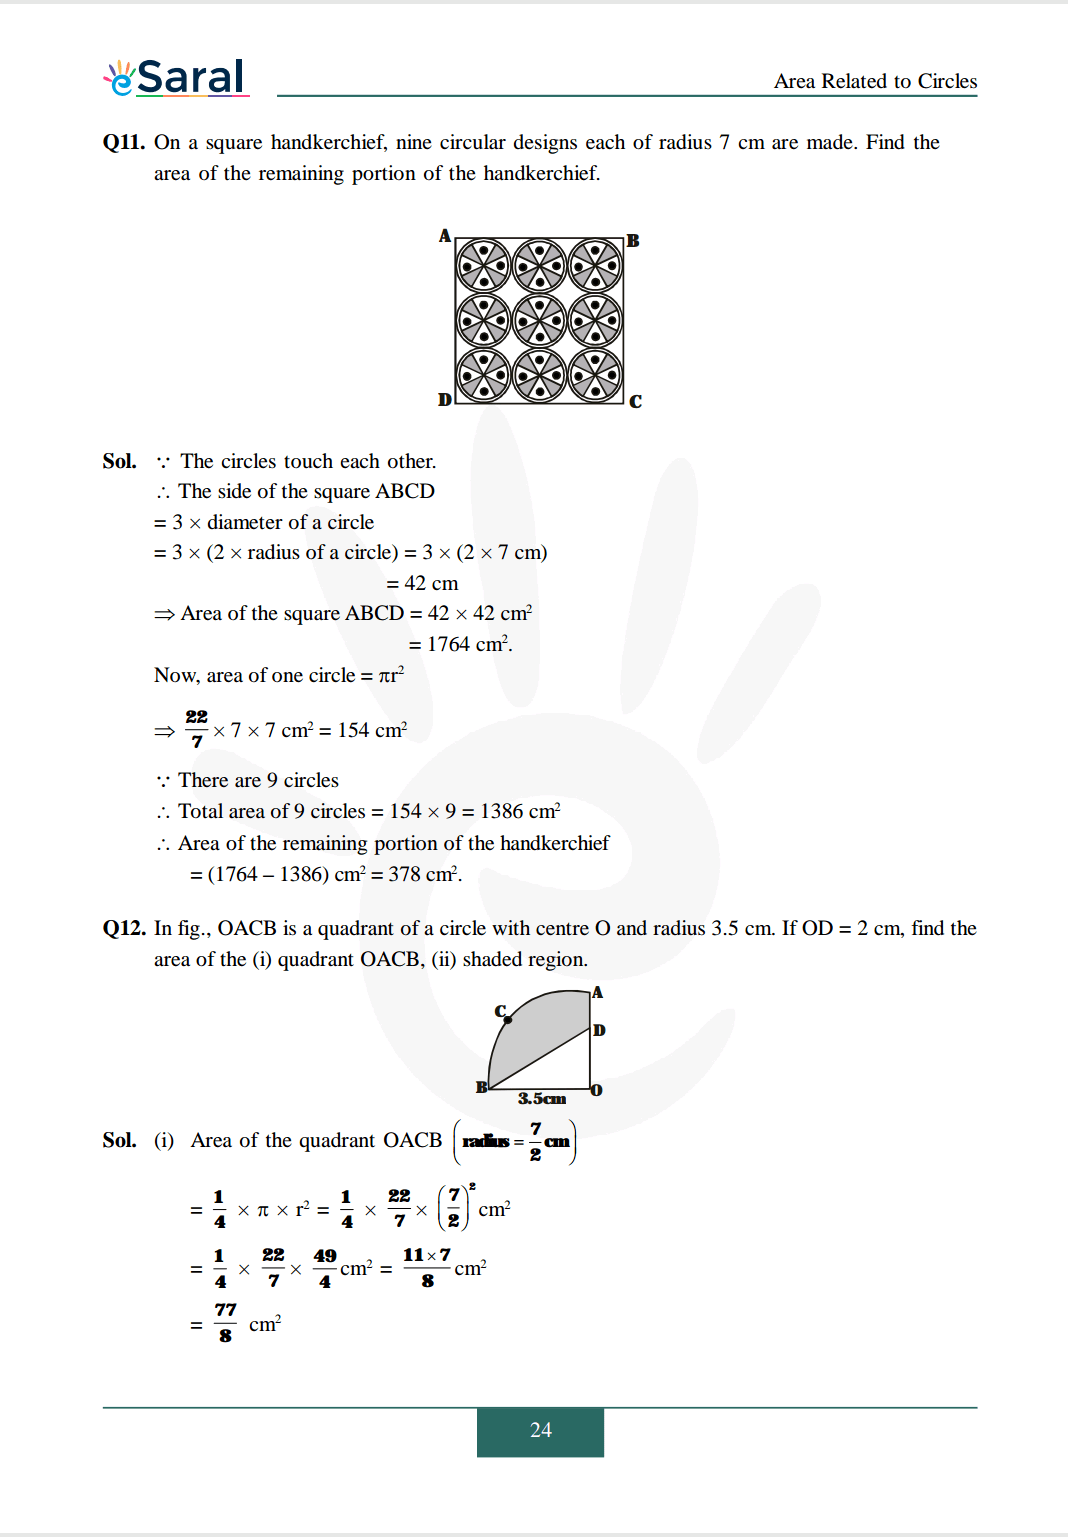 Chapter 12 exercise 12.3 solutions Image 10